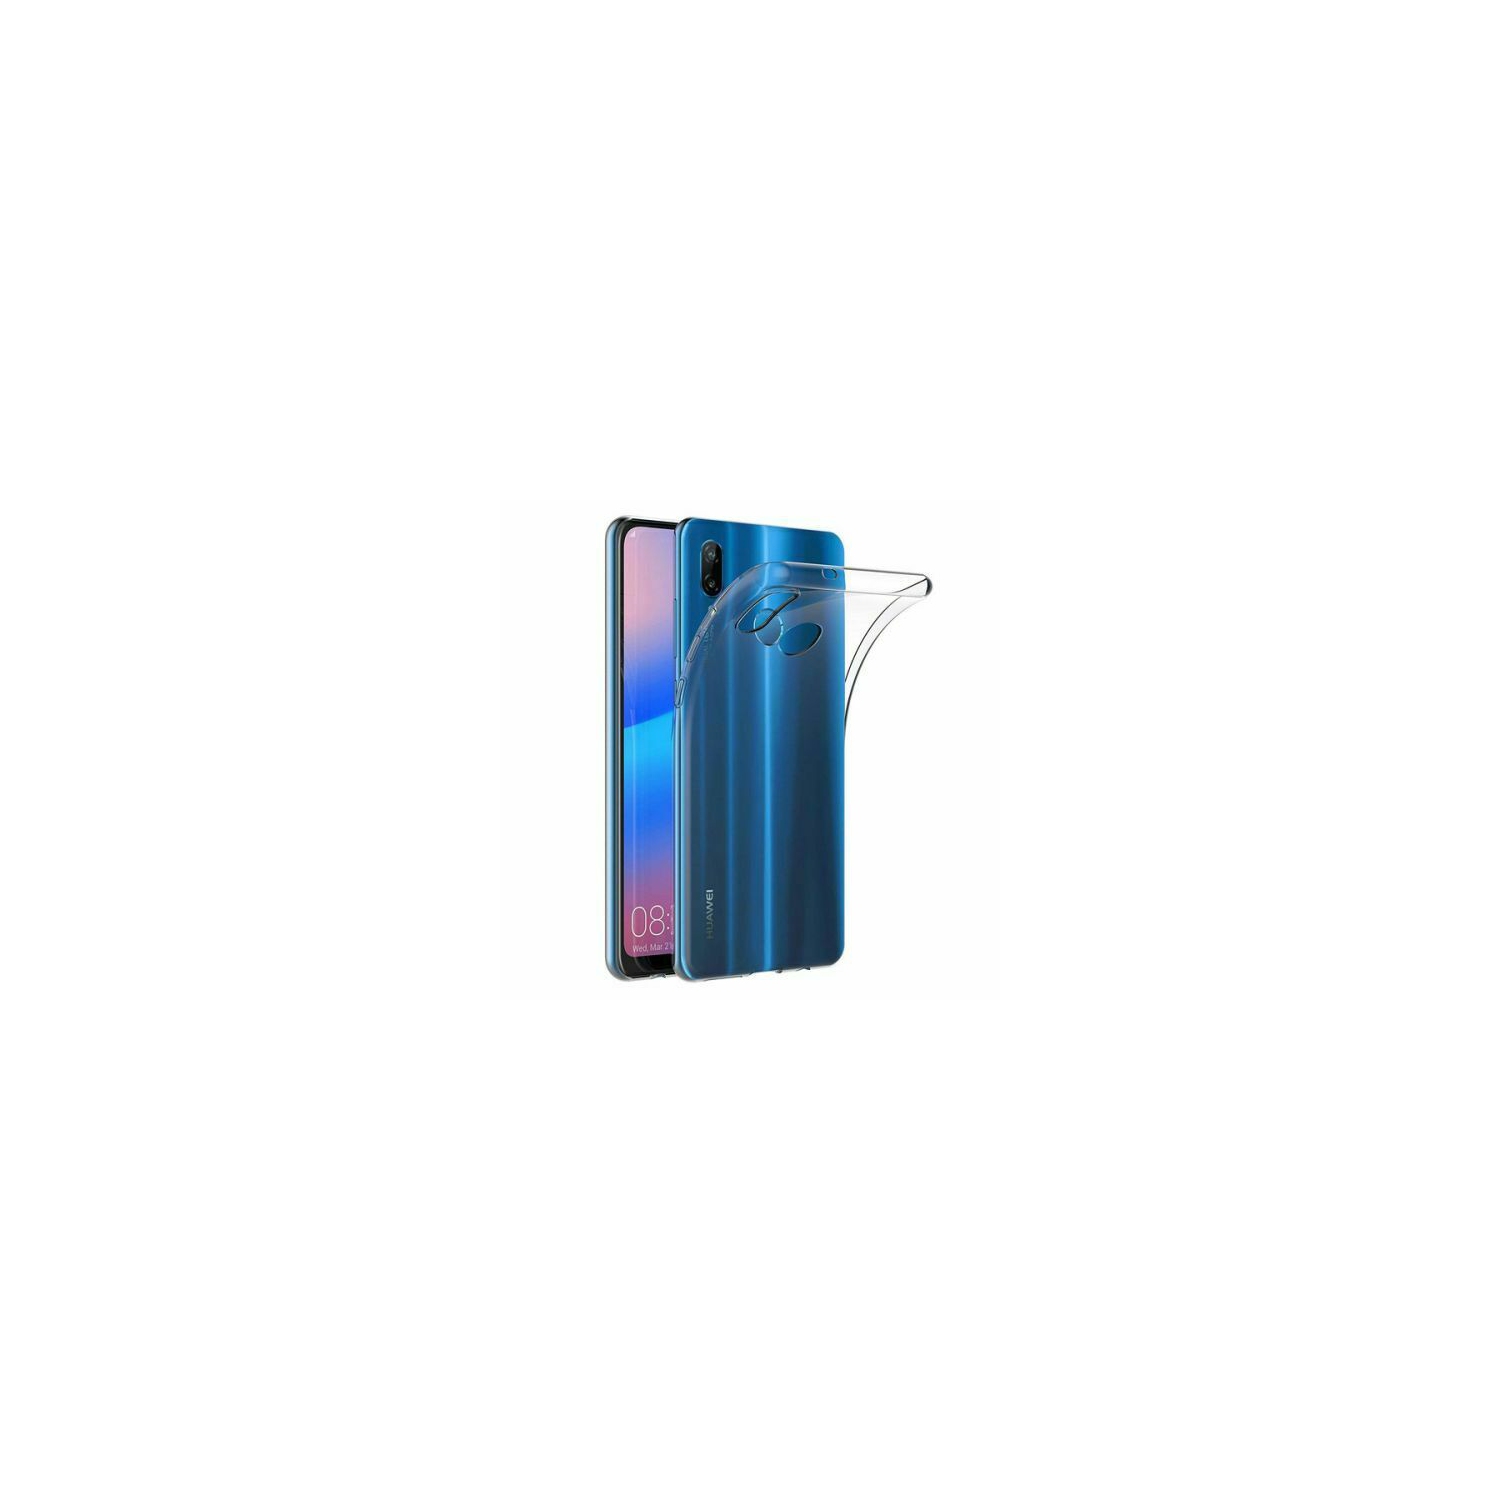 【CSmart】 Ultra Thin Soft TPU Silicone Jelly Bumper Back Cover Case for Huawei P20 Lite, Transparent Clear